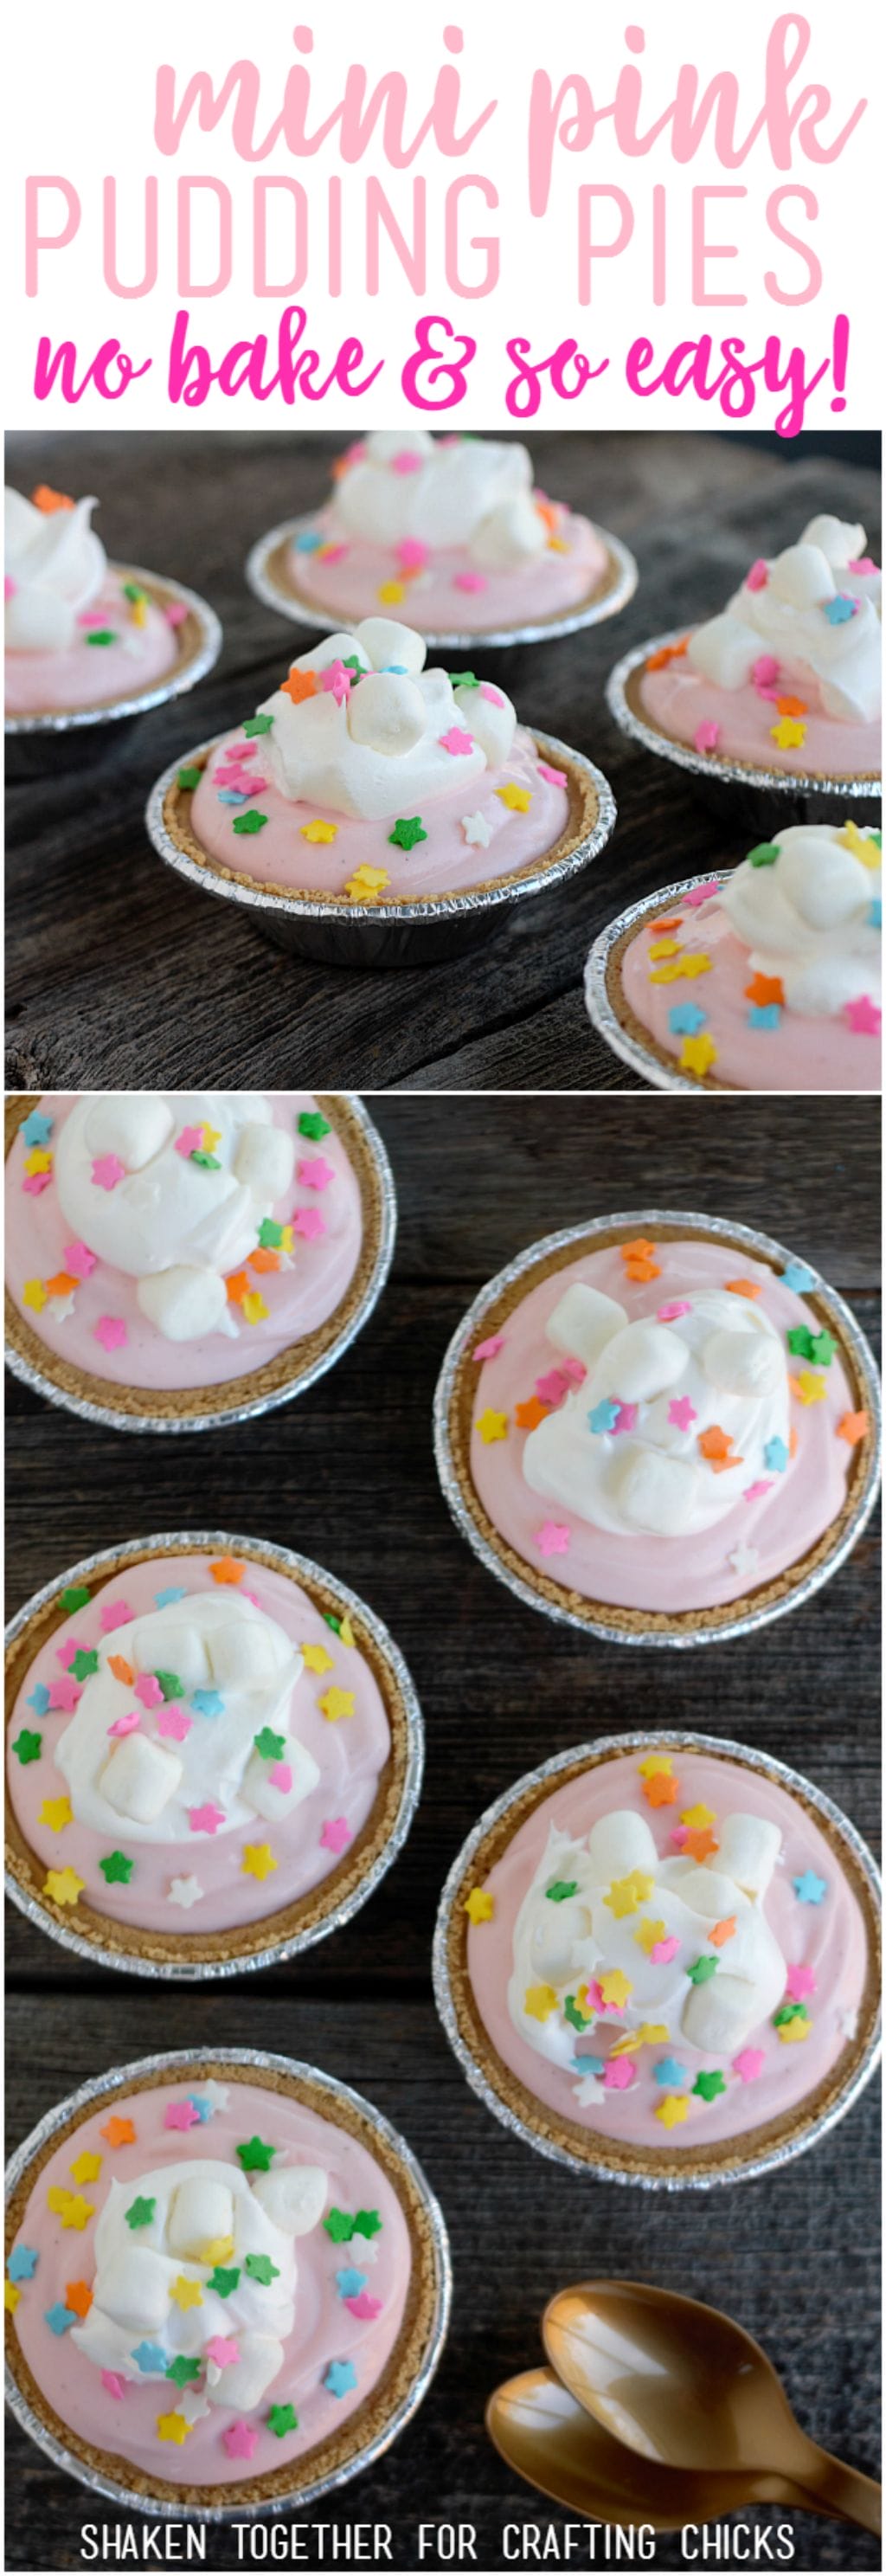 Mini Pink Pudding Pies are as easy as they are delicious! These no-bake strawberry flavored pies are topped with whipped cream, marshmallows & sprinkles!